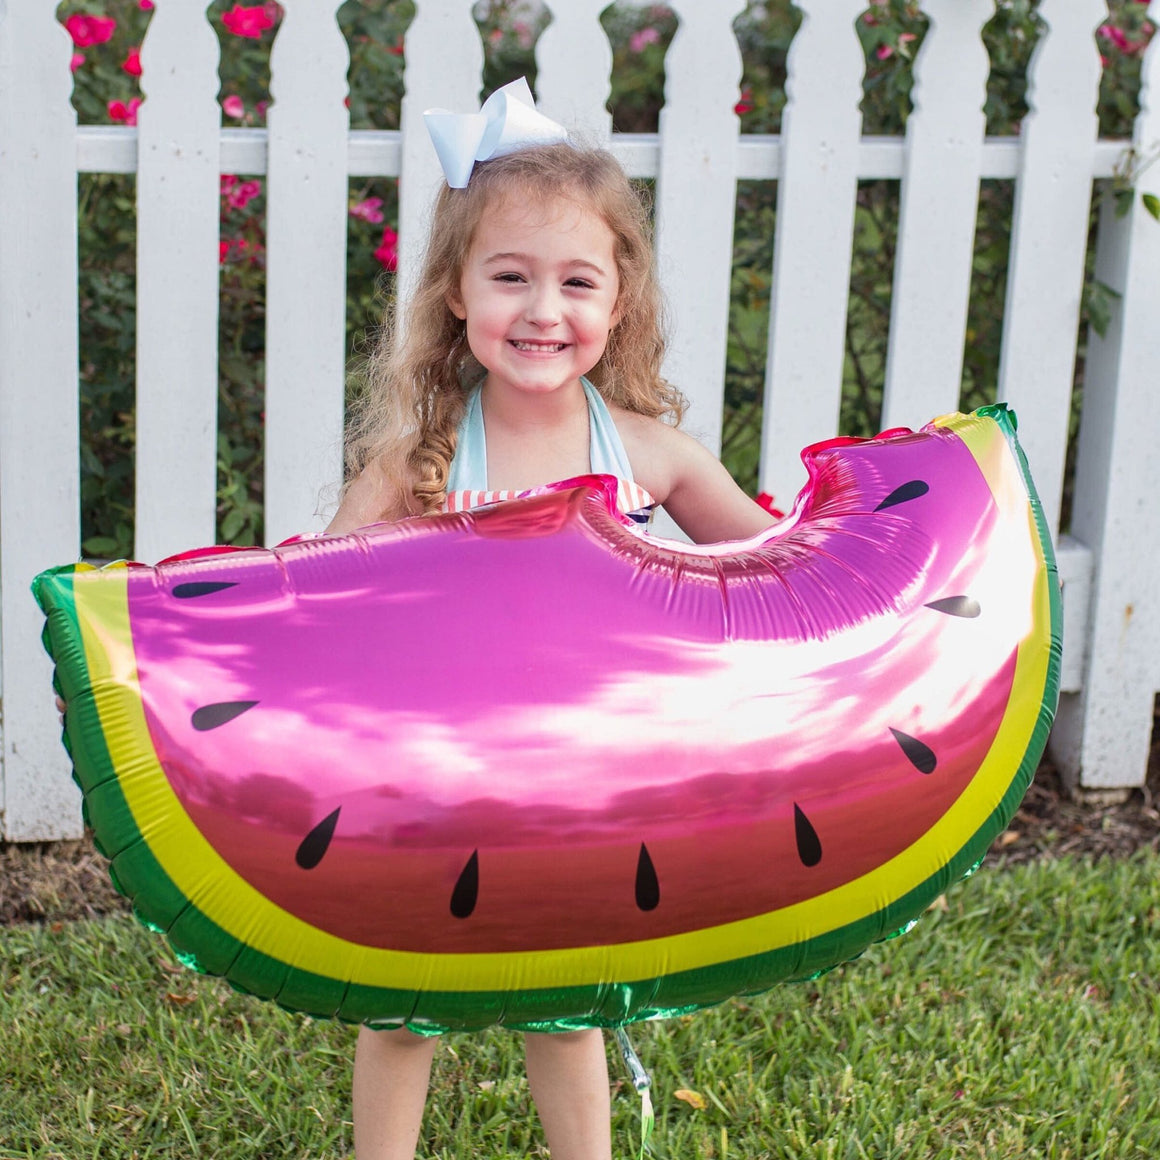 Little girl wearing a white bow with a big smile holding a 35 inch jumbo watermelon fruit balloon.